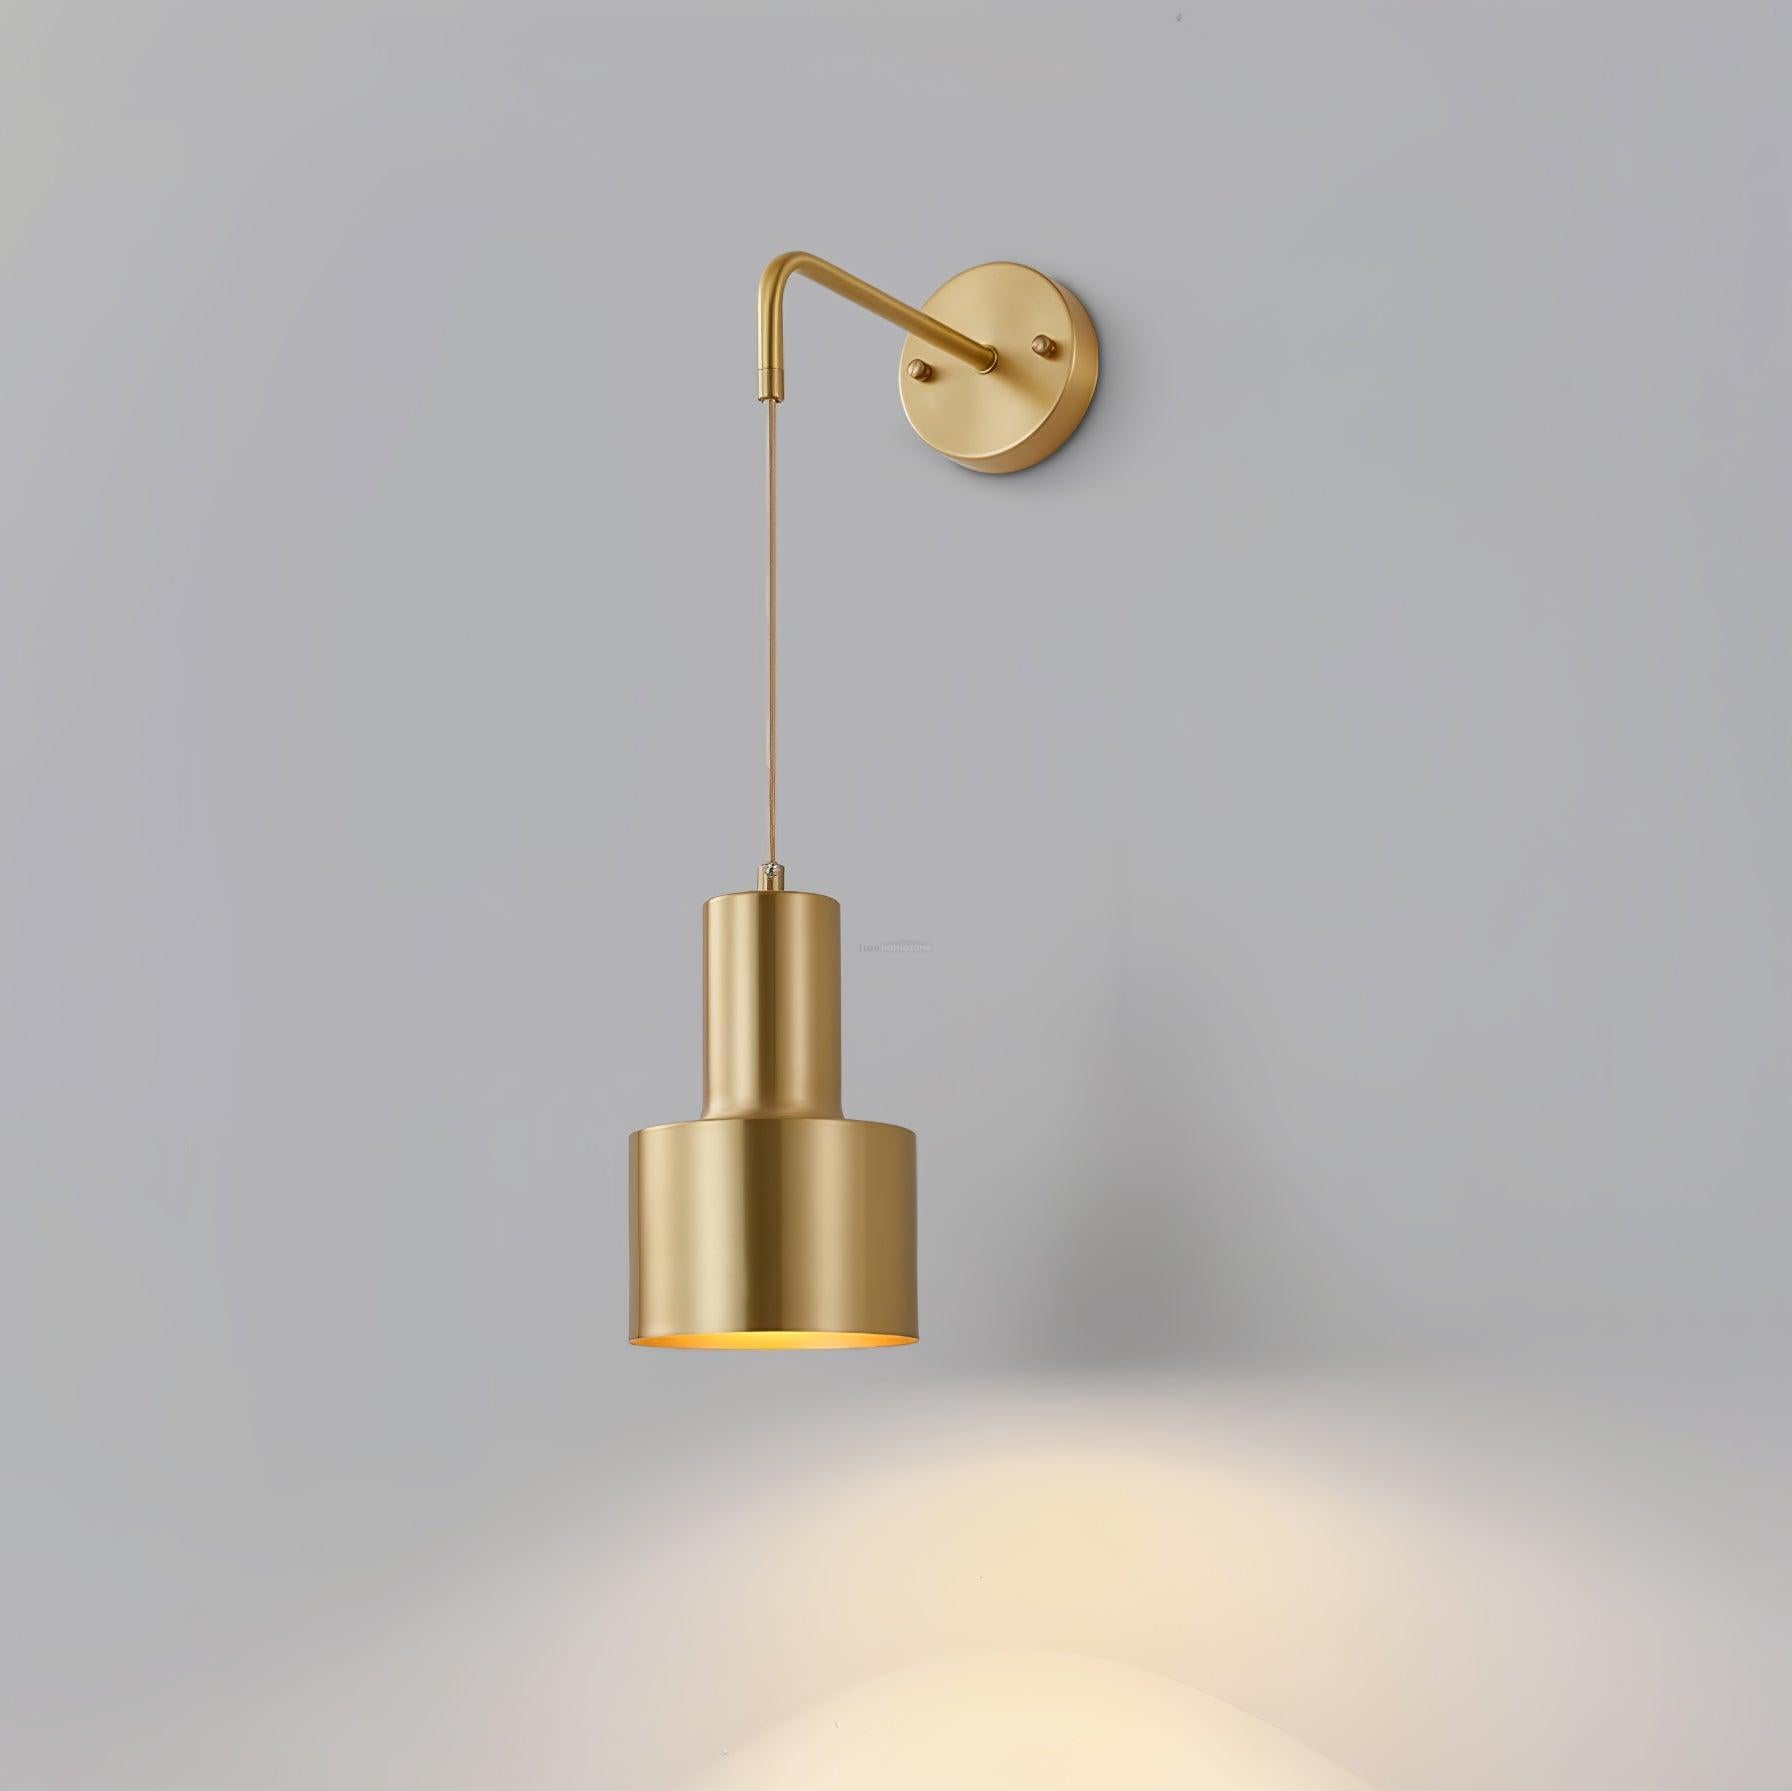 Arne Wall Sconce